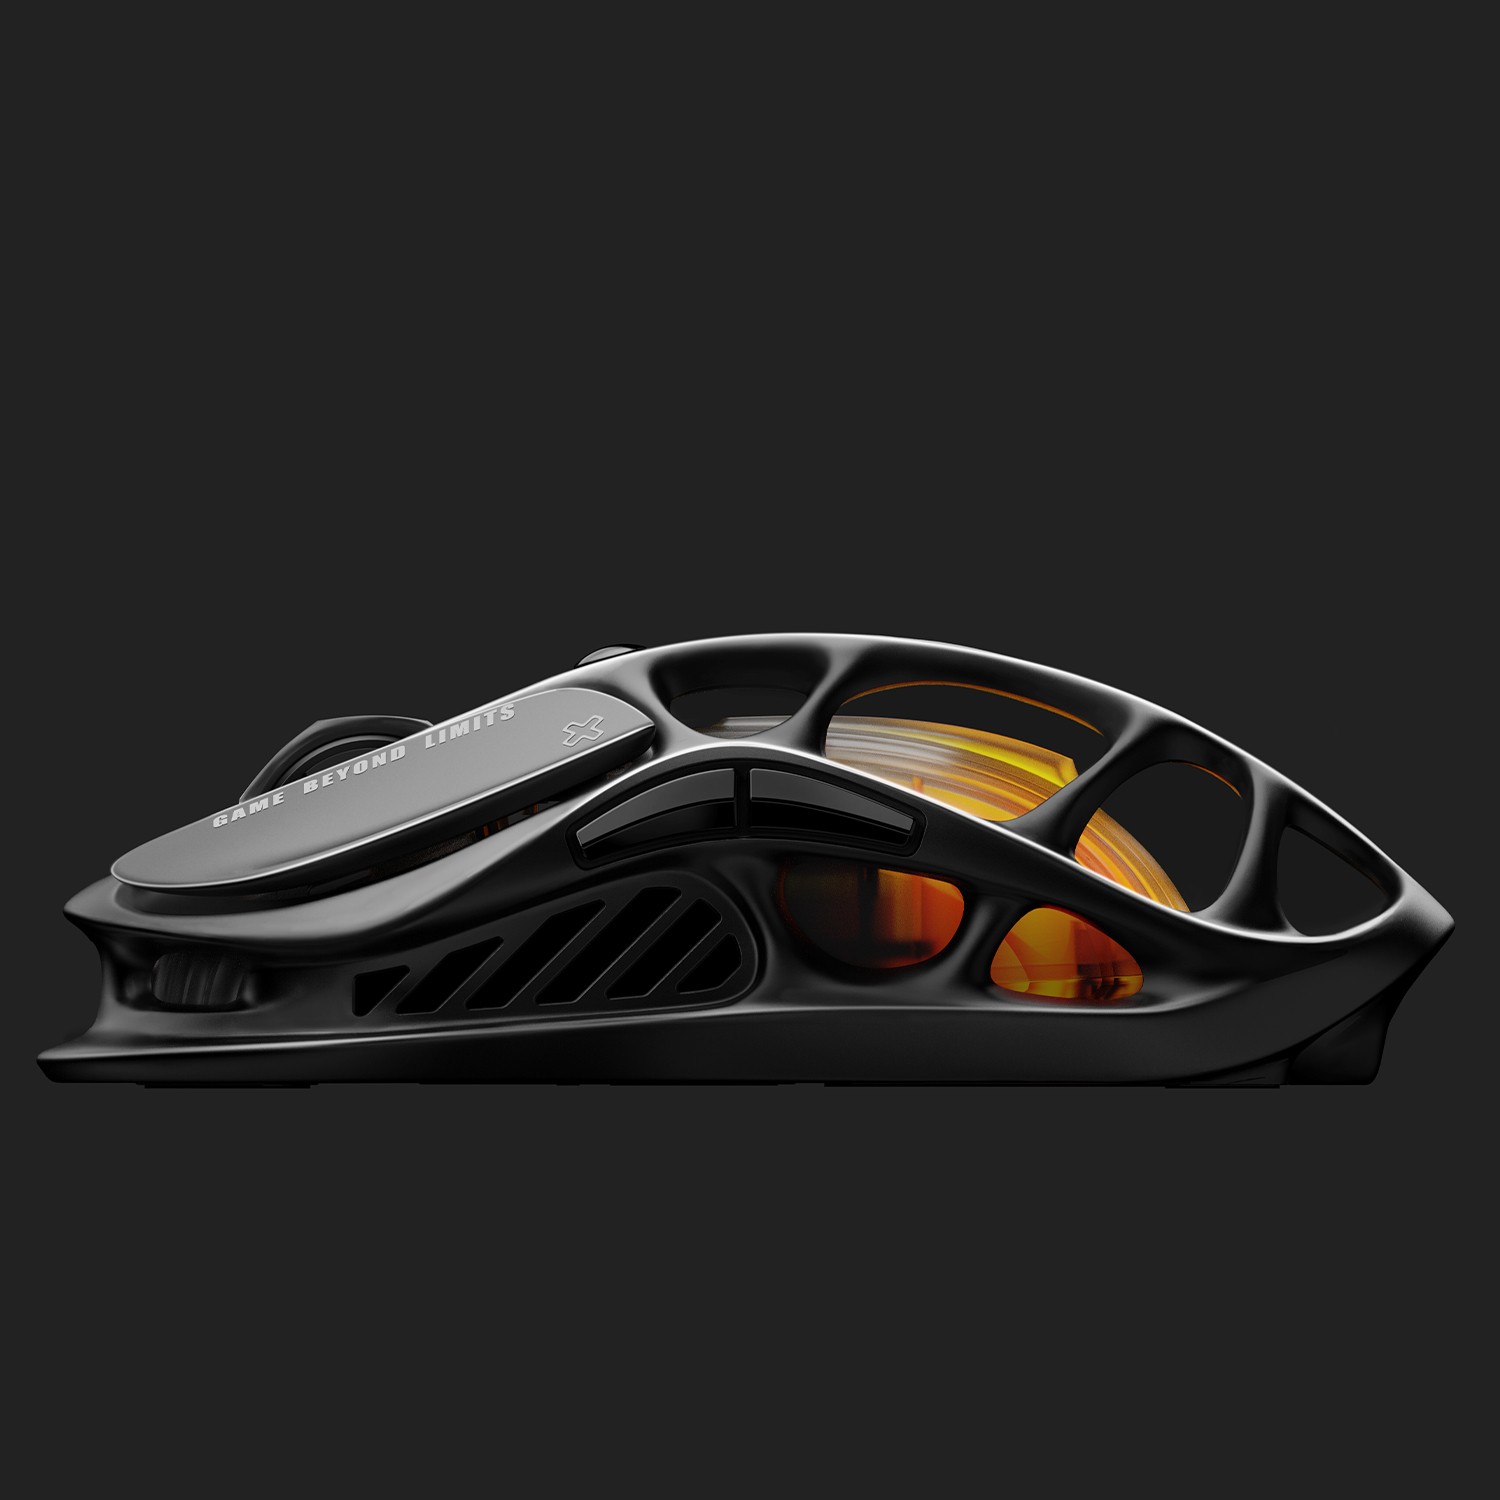 Gravastar M2 Gaming Mouse in Stealth Black